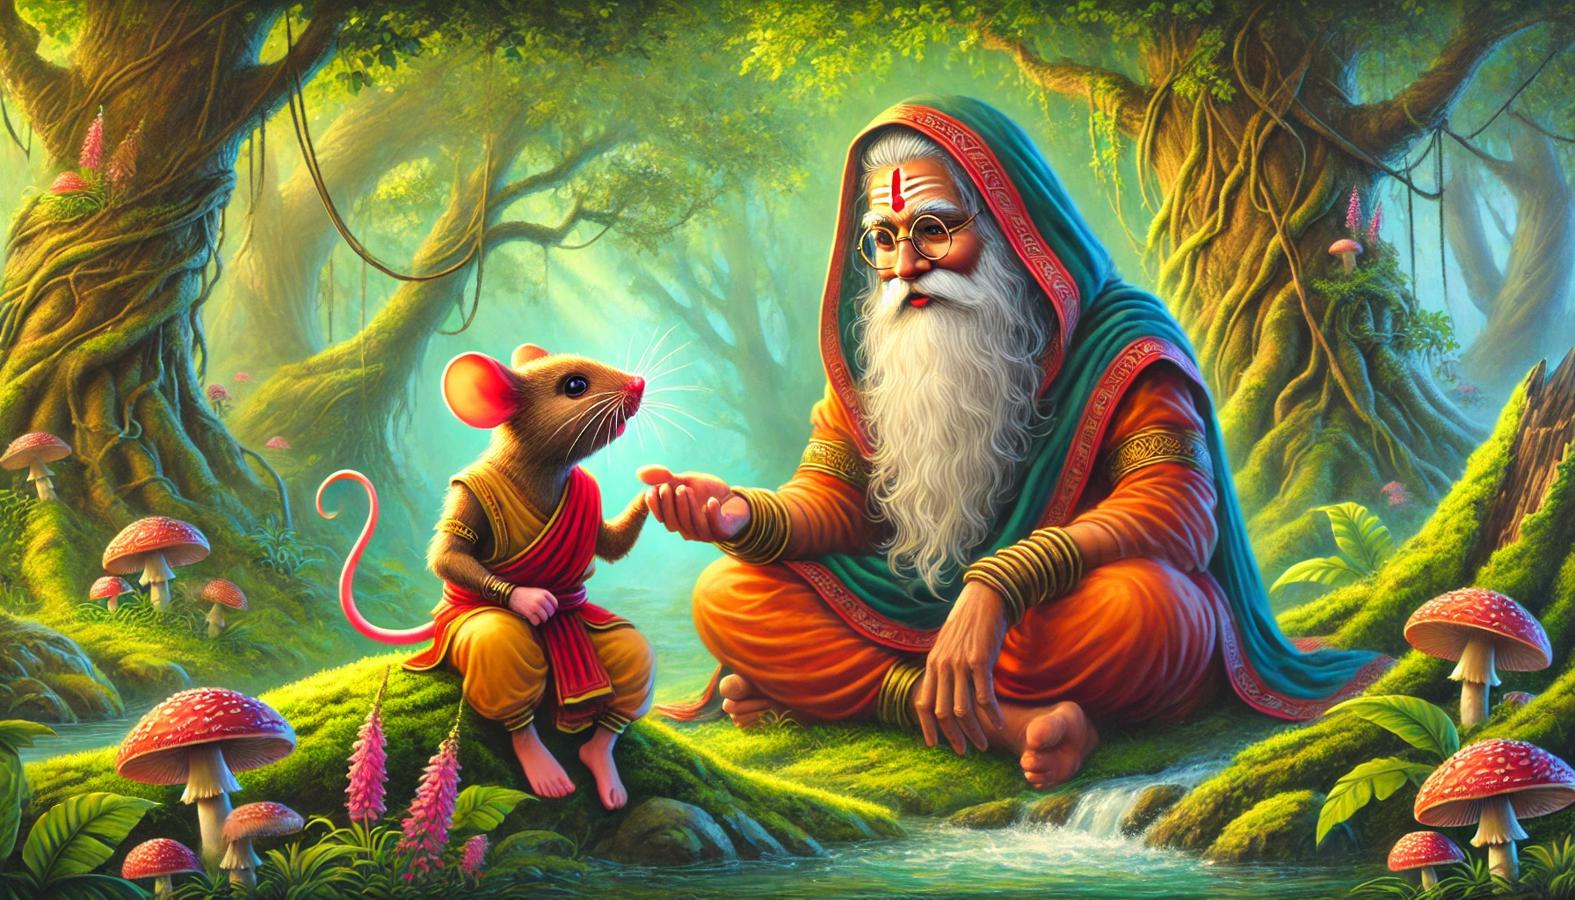 Aranya, now a mouse again, sits beside the wise hermit Kaladitya in the vibrant ancient forest, showing their bond and harmony with nature.